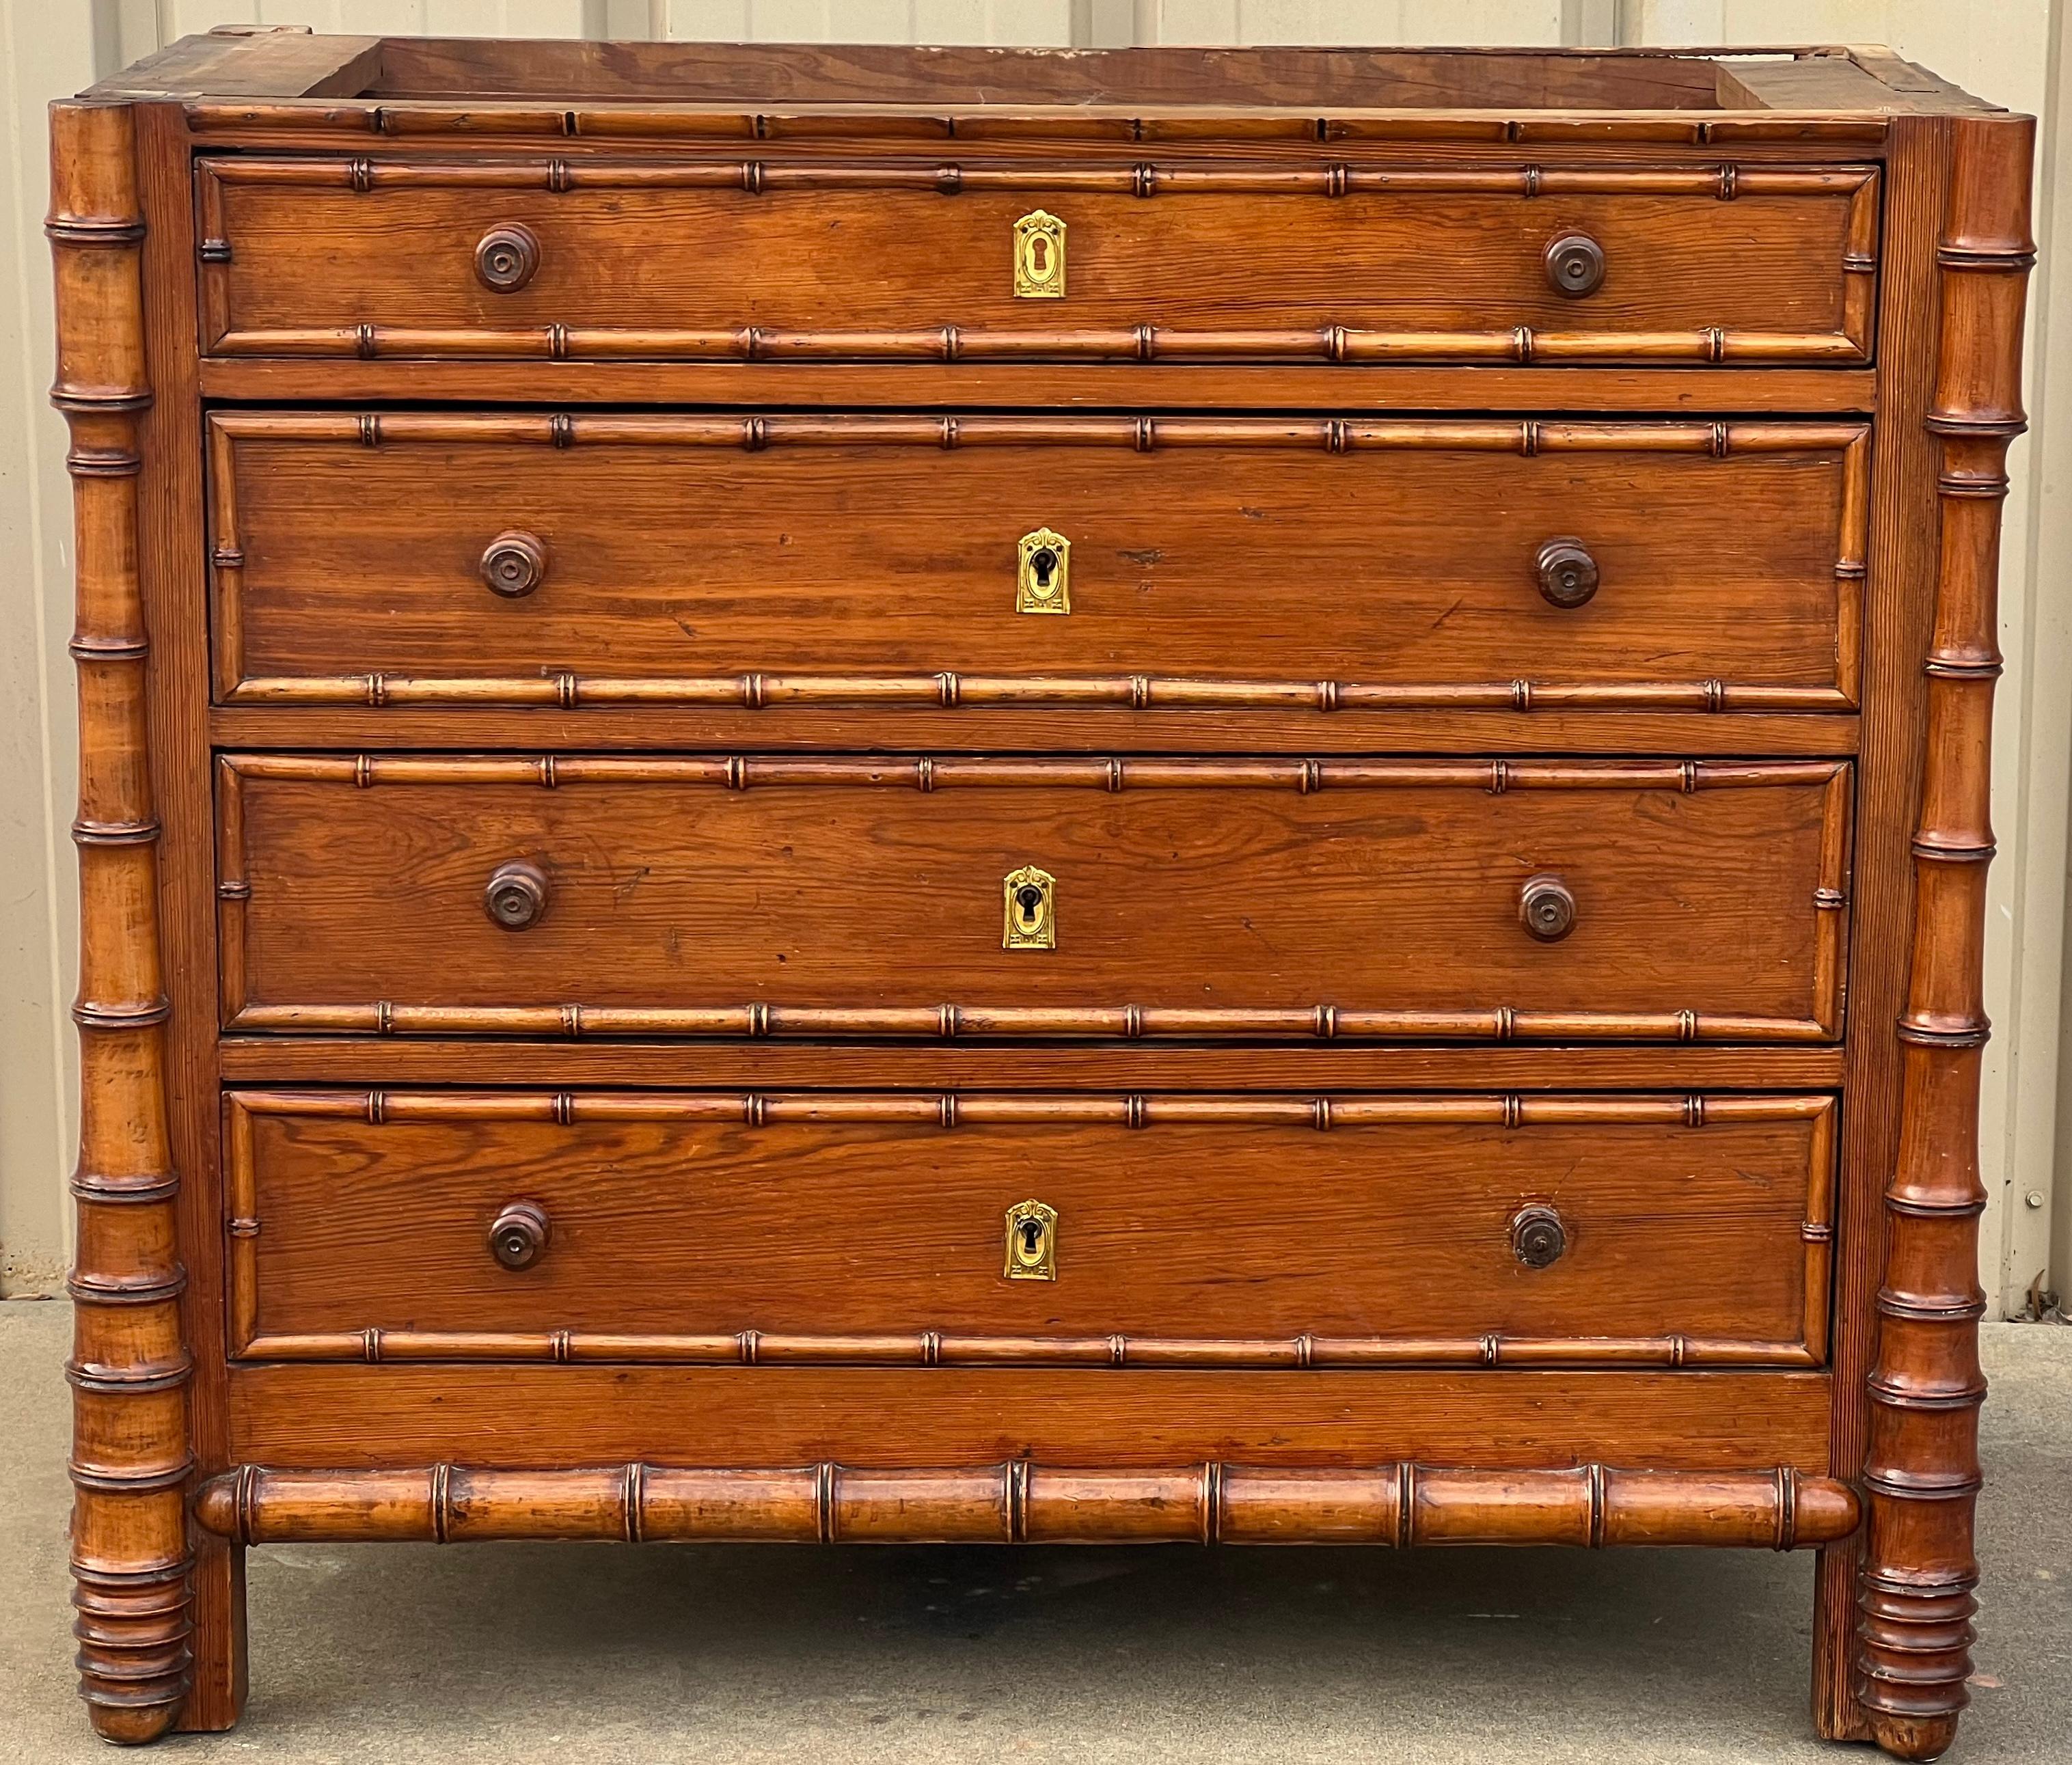 20th Century 19th-C. French Aesthetic Movement Faux Bamboo Pine & Marble Chest / Commode